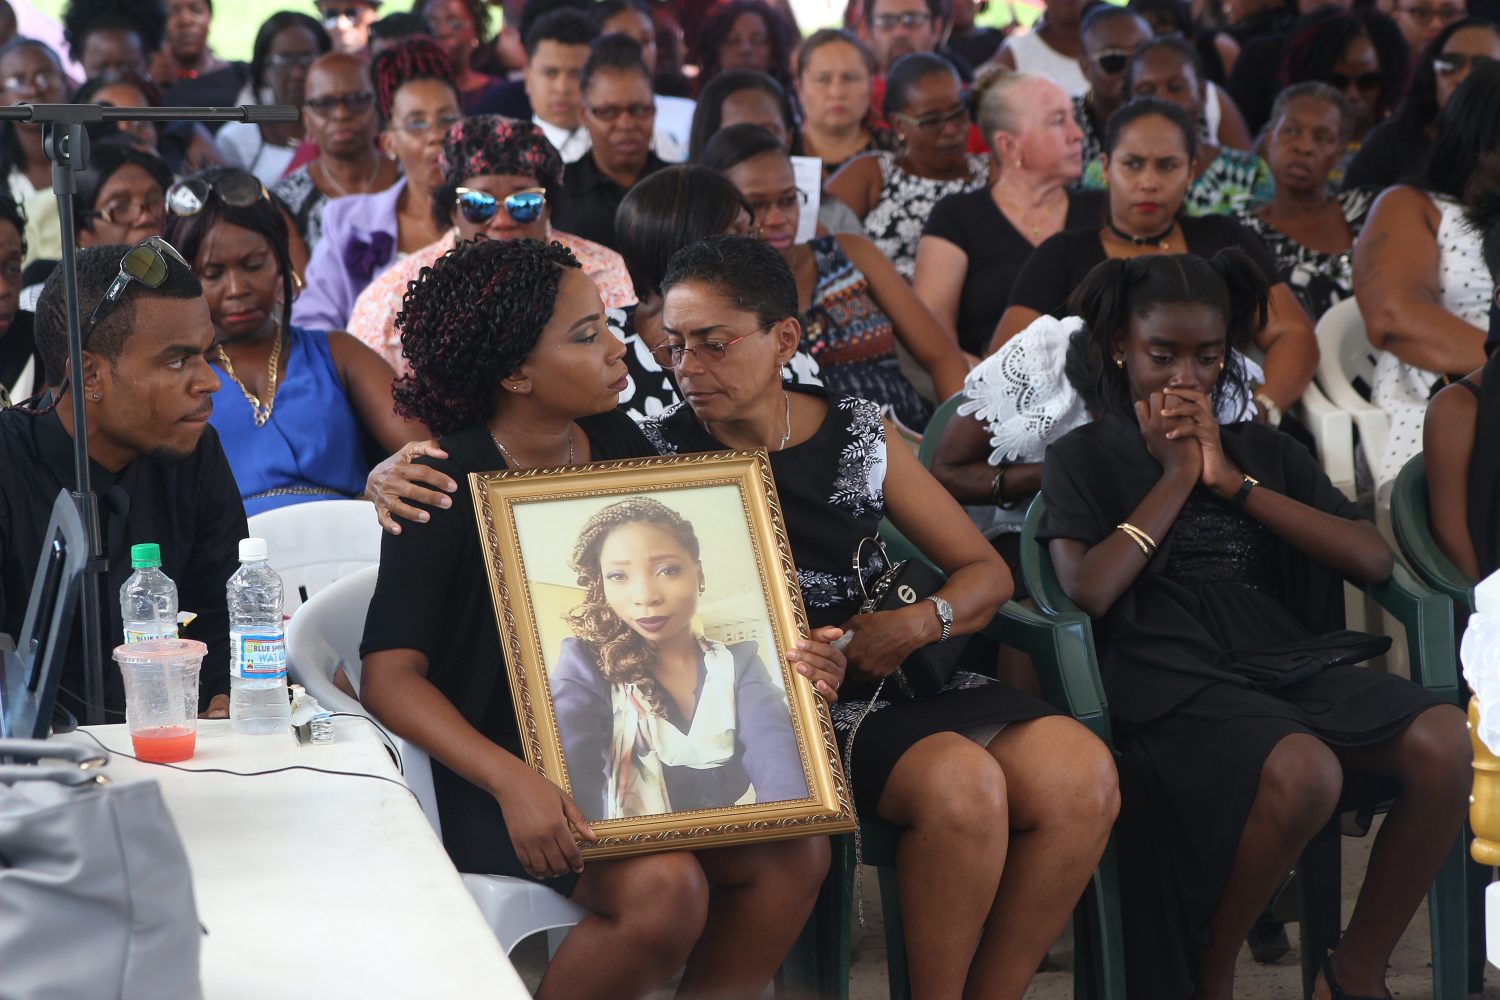 Kessandra Blackman, Kescia Barnche’s twin sister, being comforted as she held on to a portrait of her murdered sibling, who was laid to rest yesterday. (Photo by Keno George)